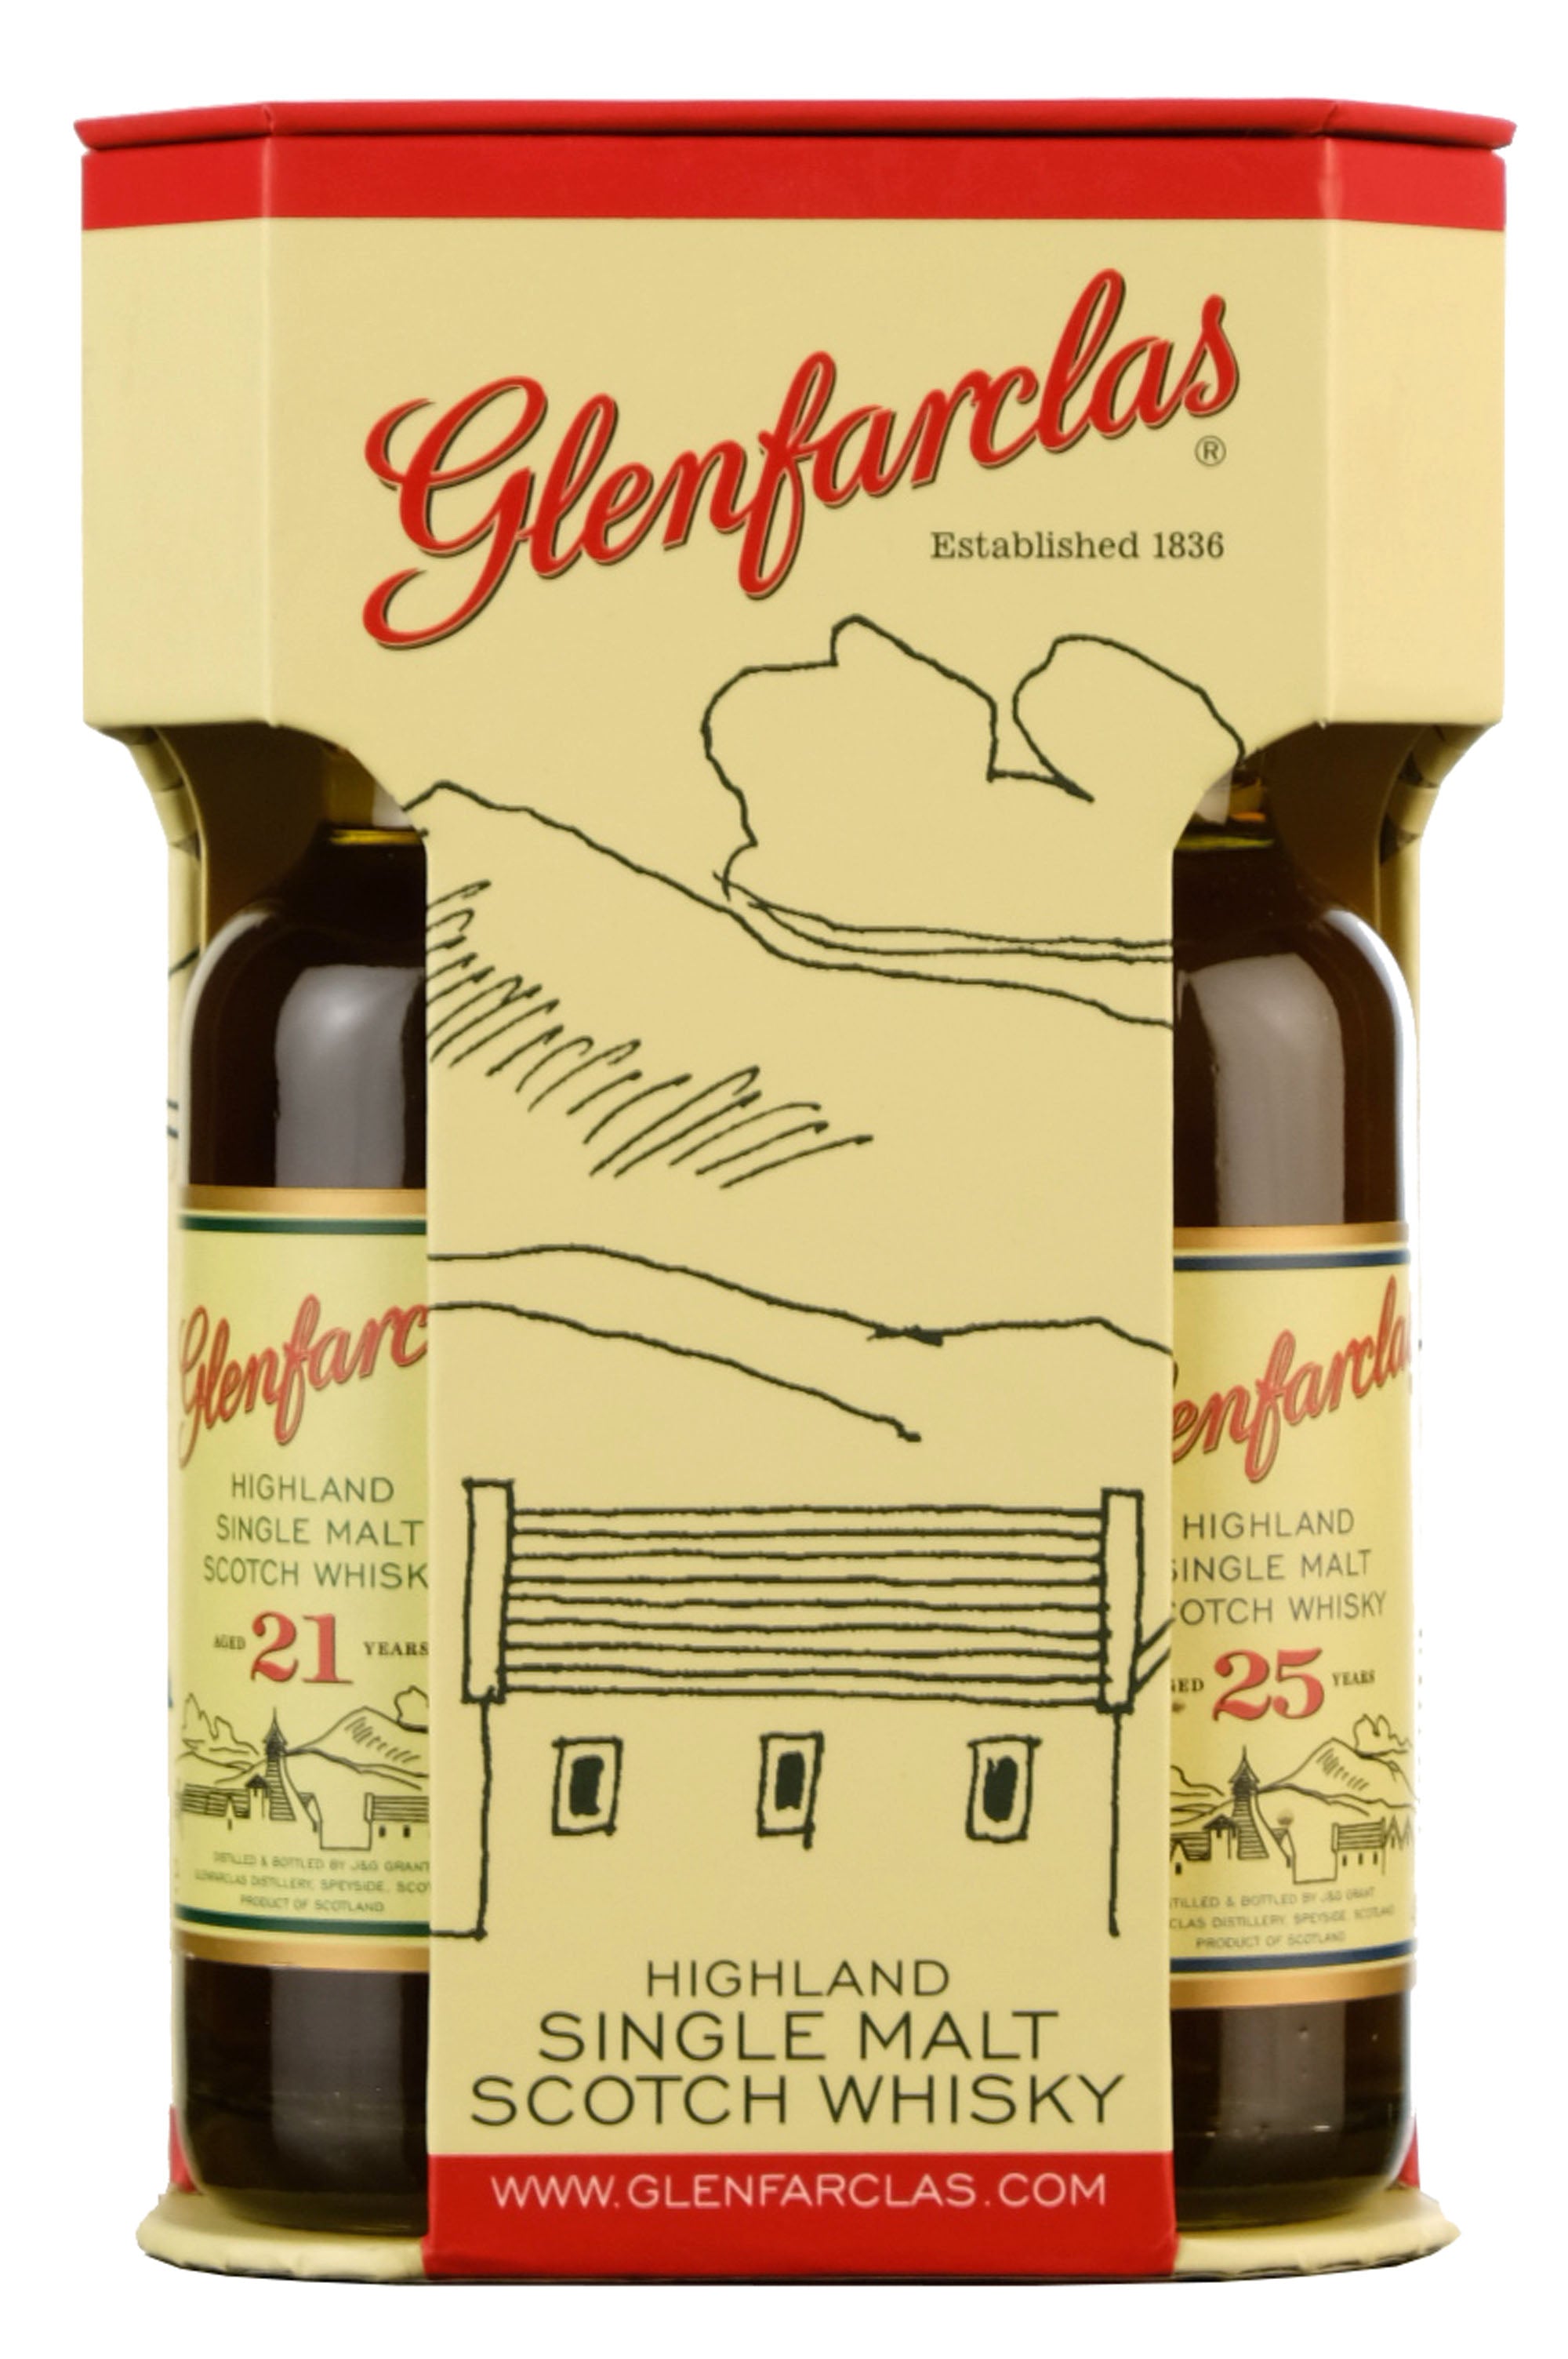 Glenfarclas 5cl Tri-Pack | 15 Year Old, 21 Year Old, 25 Year Old